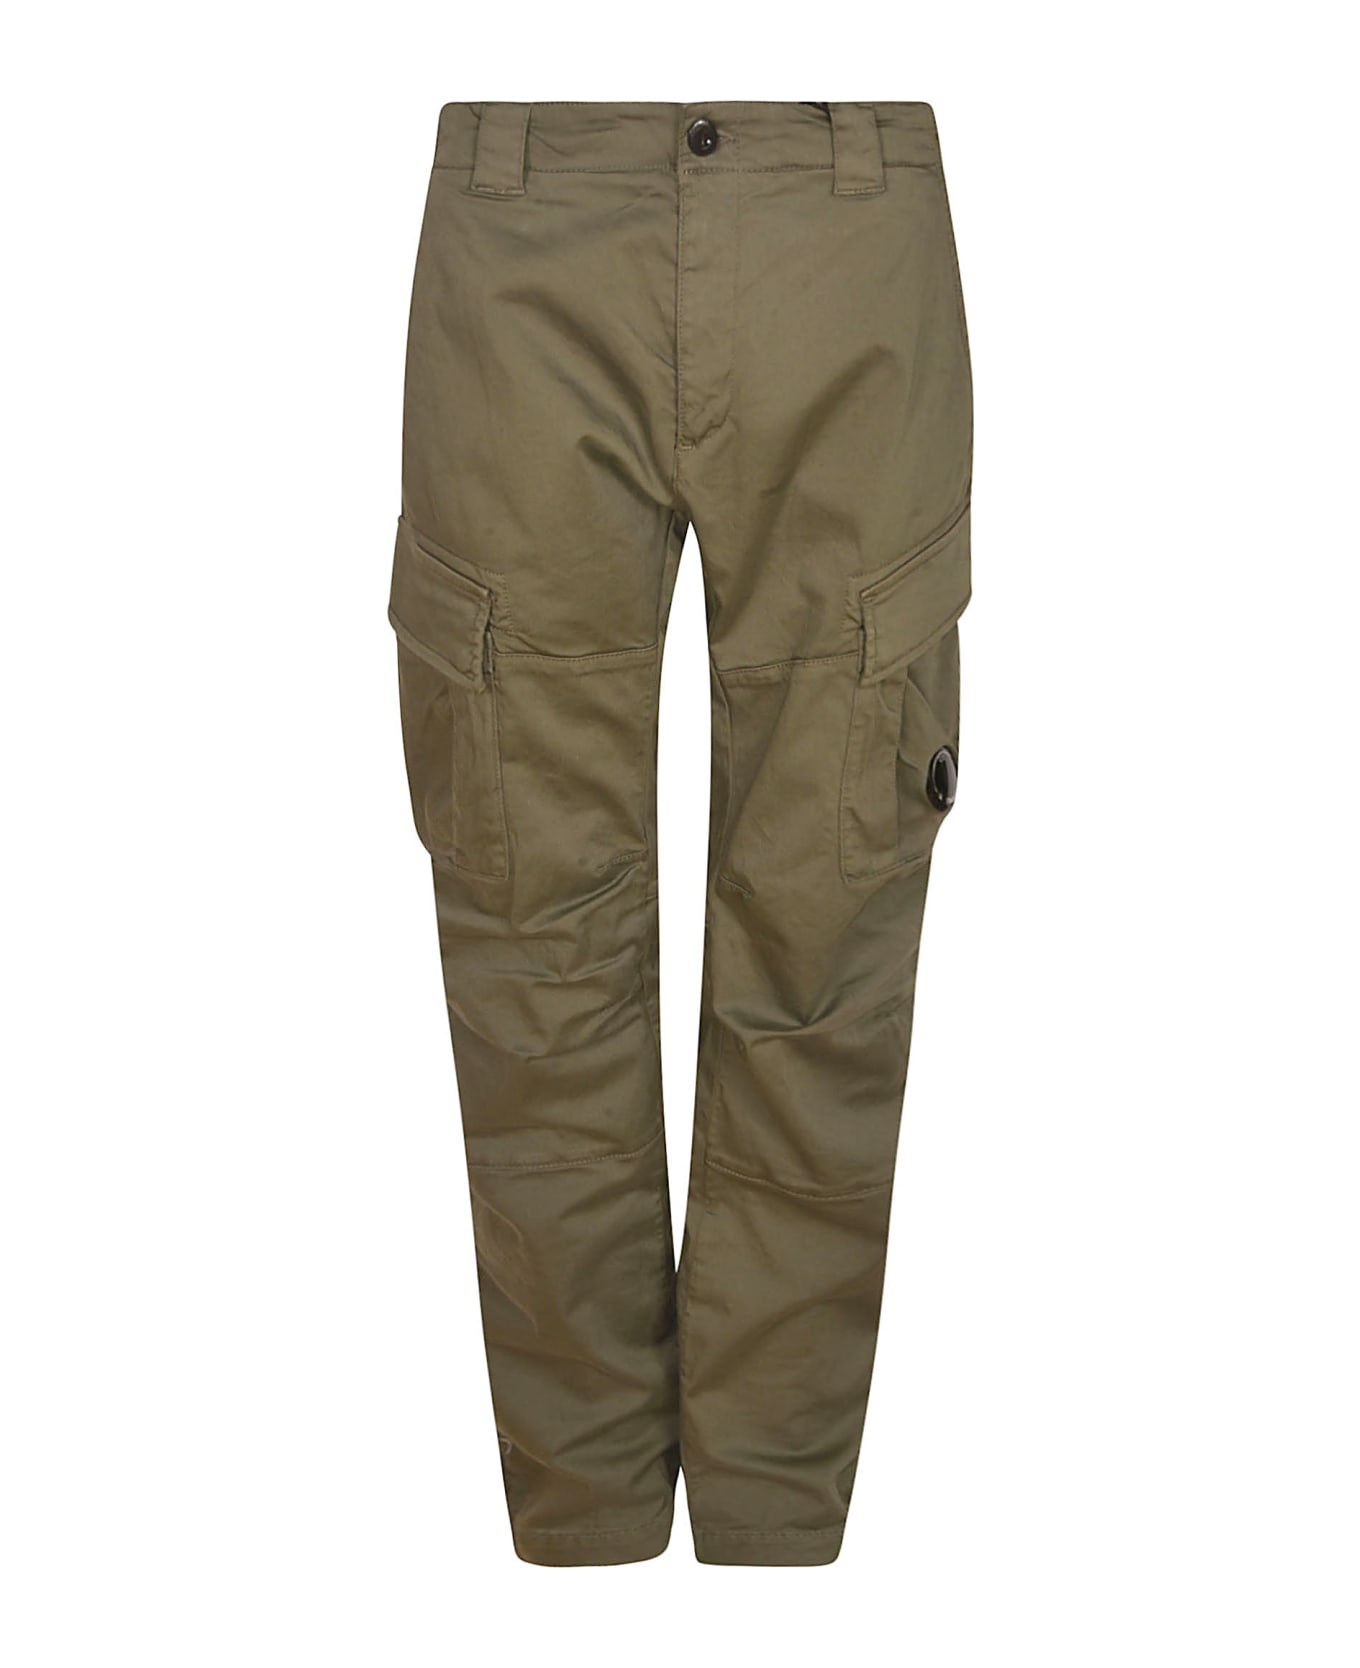 C.P. Company Cargo Long Trousers - Agave Green